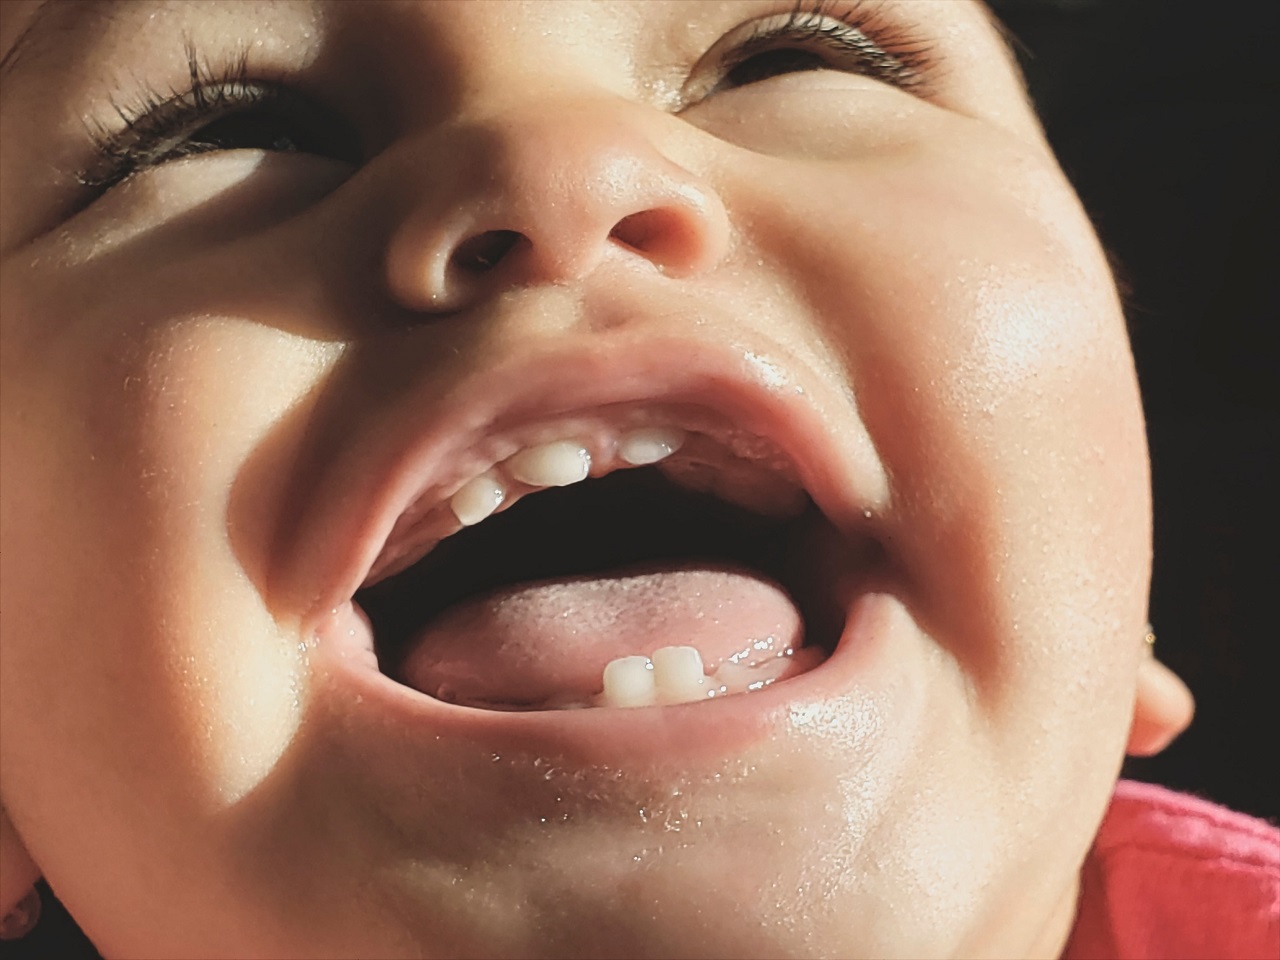 How to deal with teething in babies? Teething pain prevention